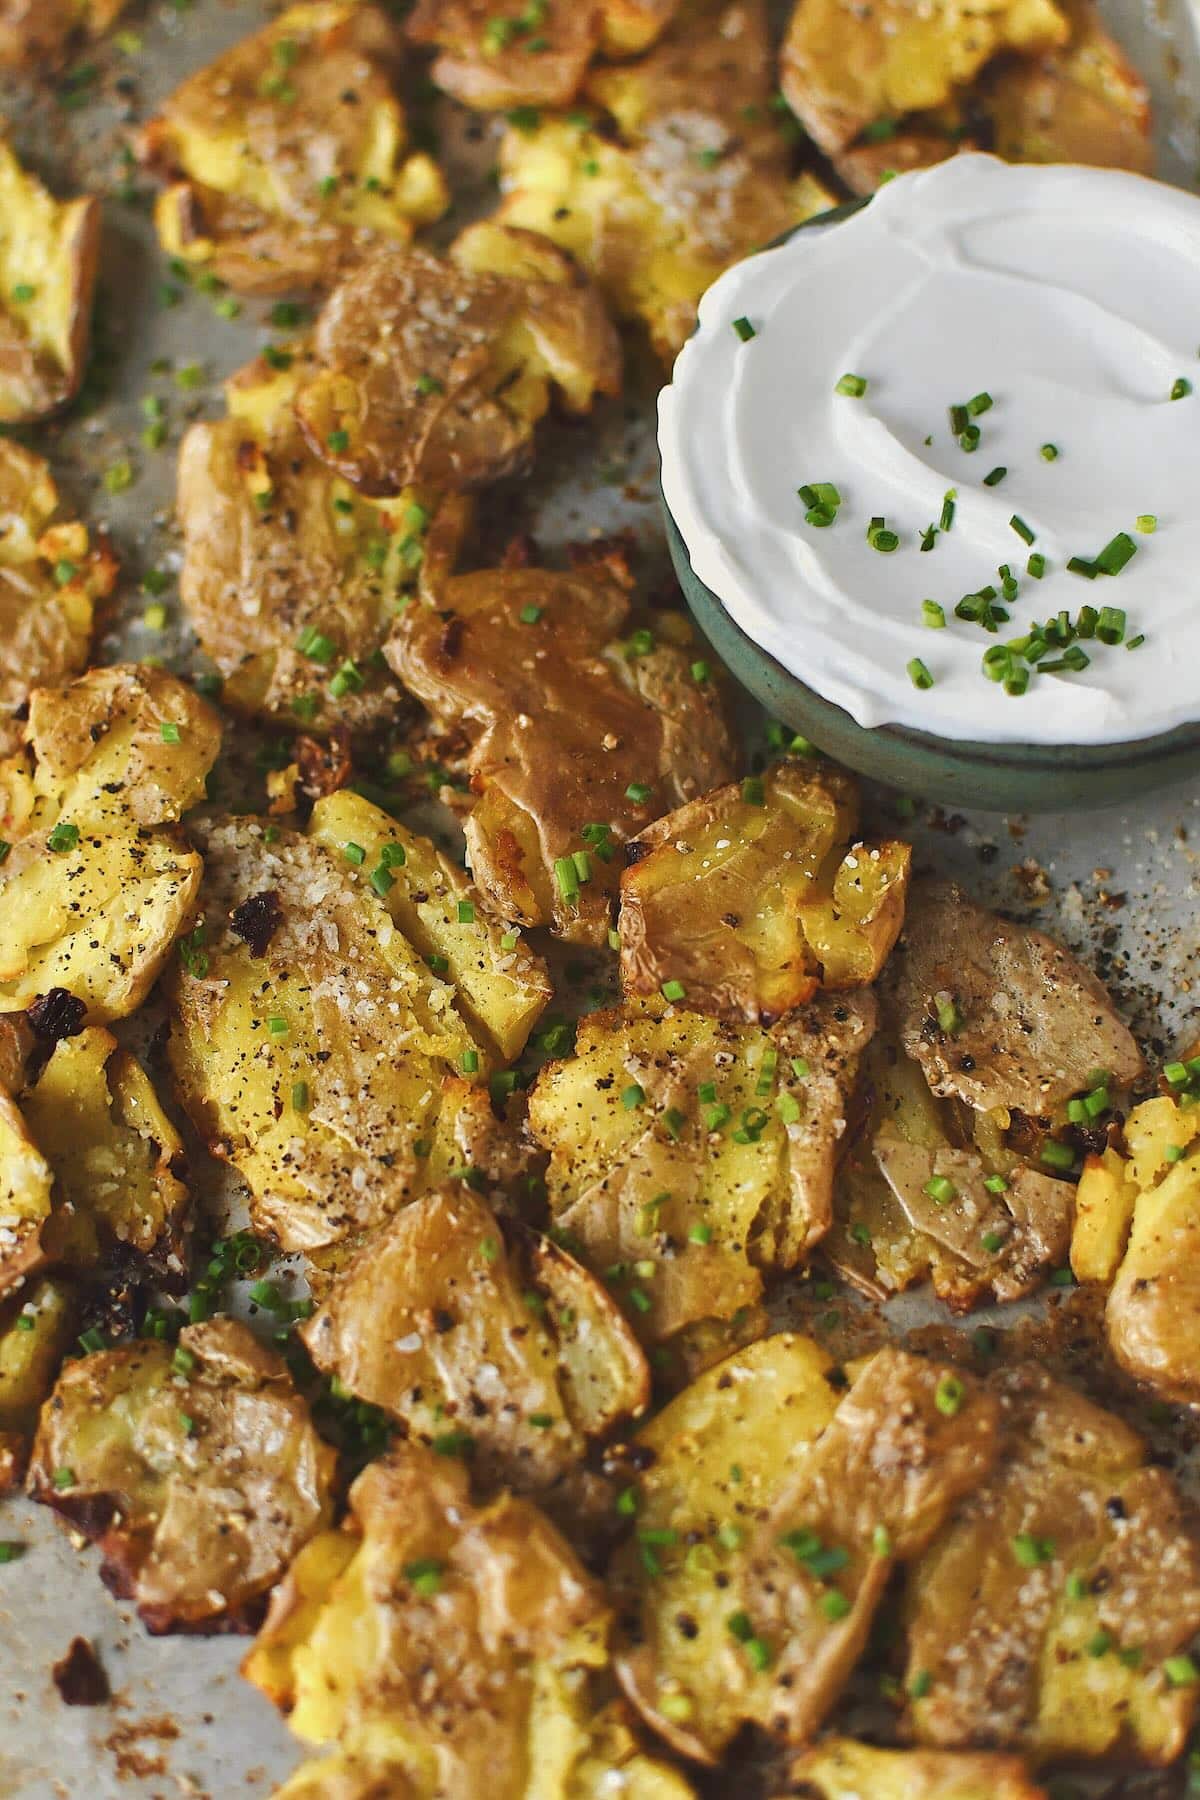 Crispy Smashed Potatoes just out of the oven ready to be enjoyed with some chive sour cream on the side.